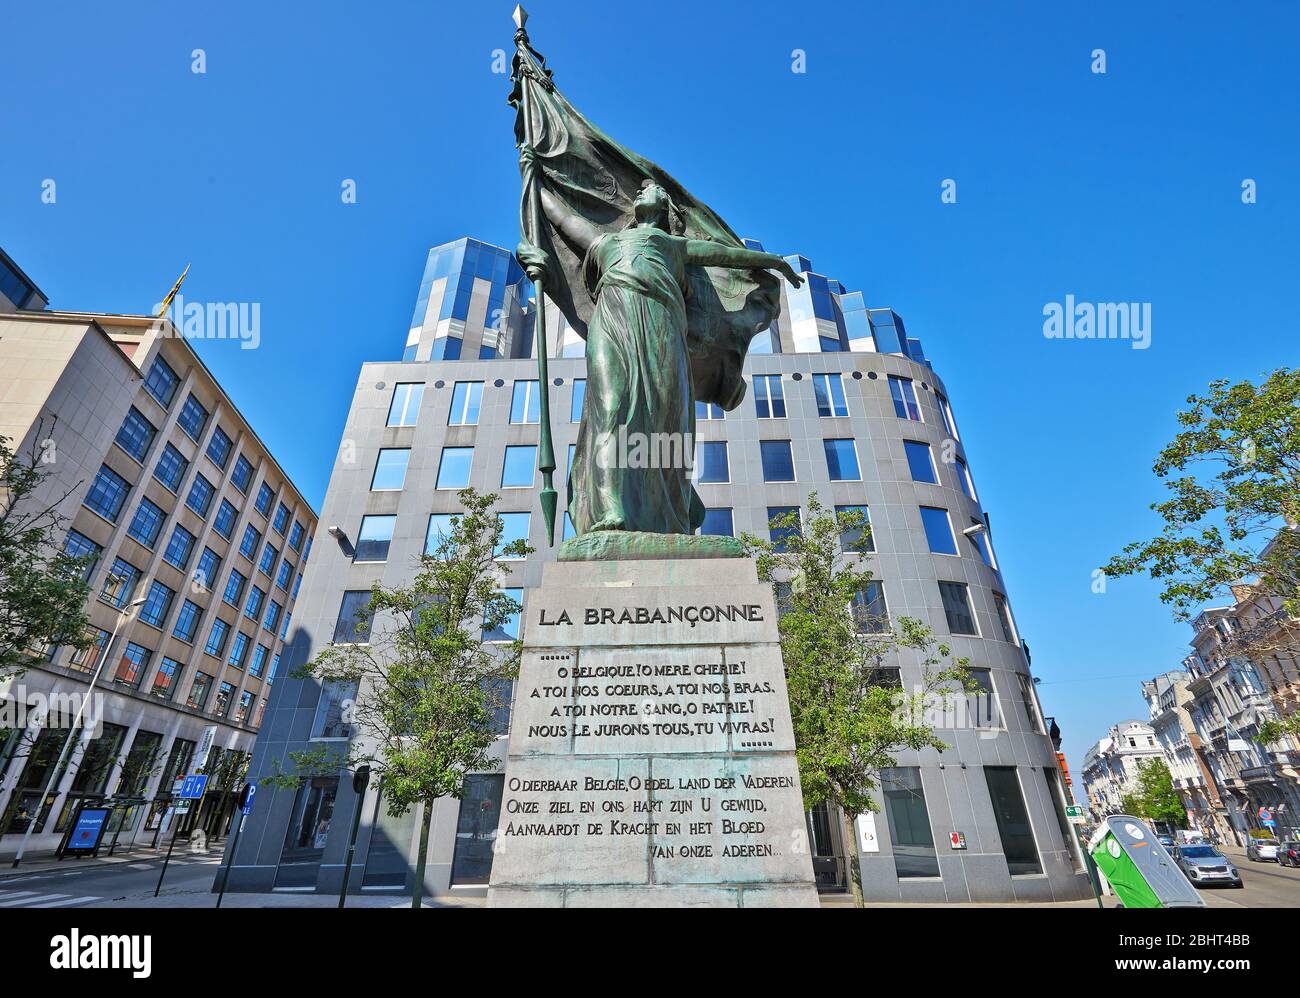 Brussels, Belgium - April 26, 2020: Square Surlet de Chokier and brabanconne statue at Brussels without any people during the confinement period. Stock Photo